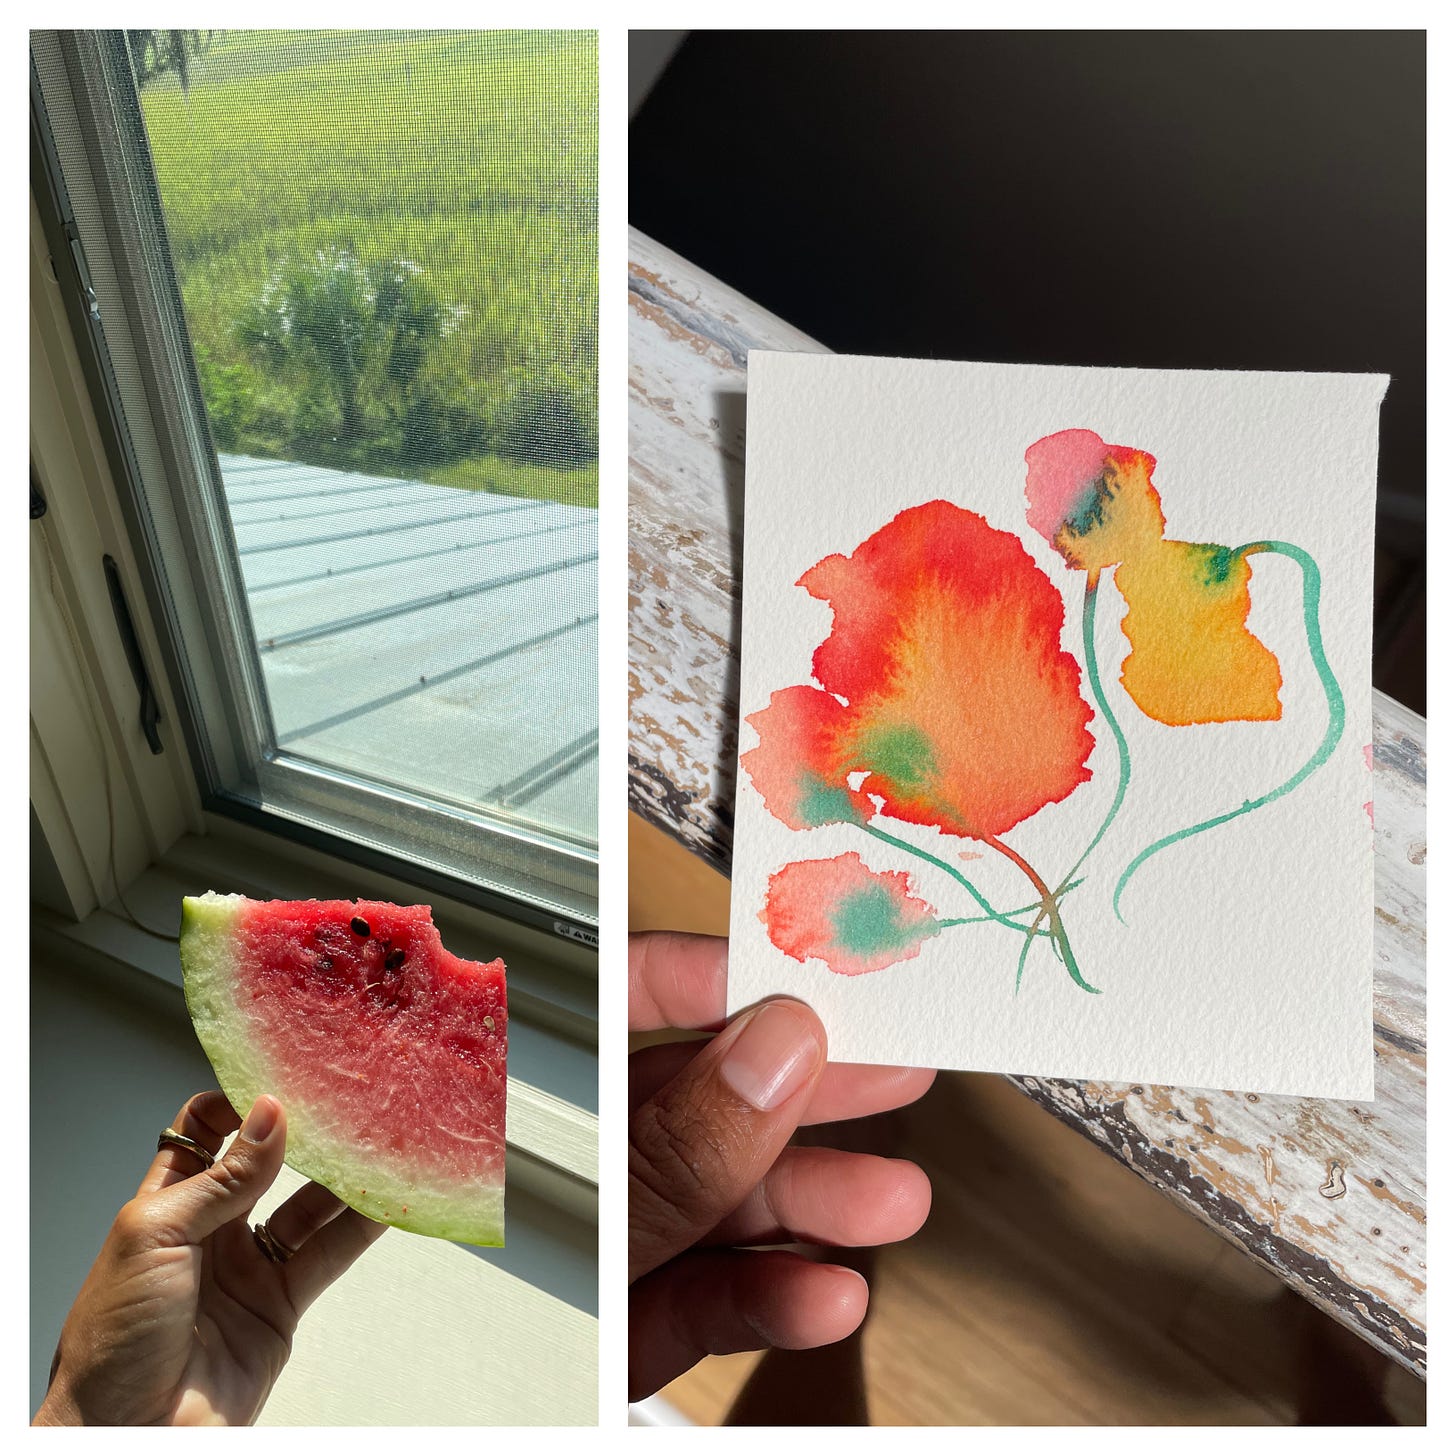 An image of a hand holding a watermelon near a window, alongside an image of a hand holding a Japanese style watercolor of flowers.